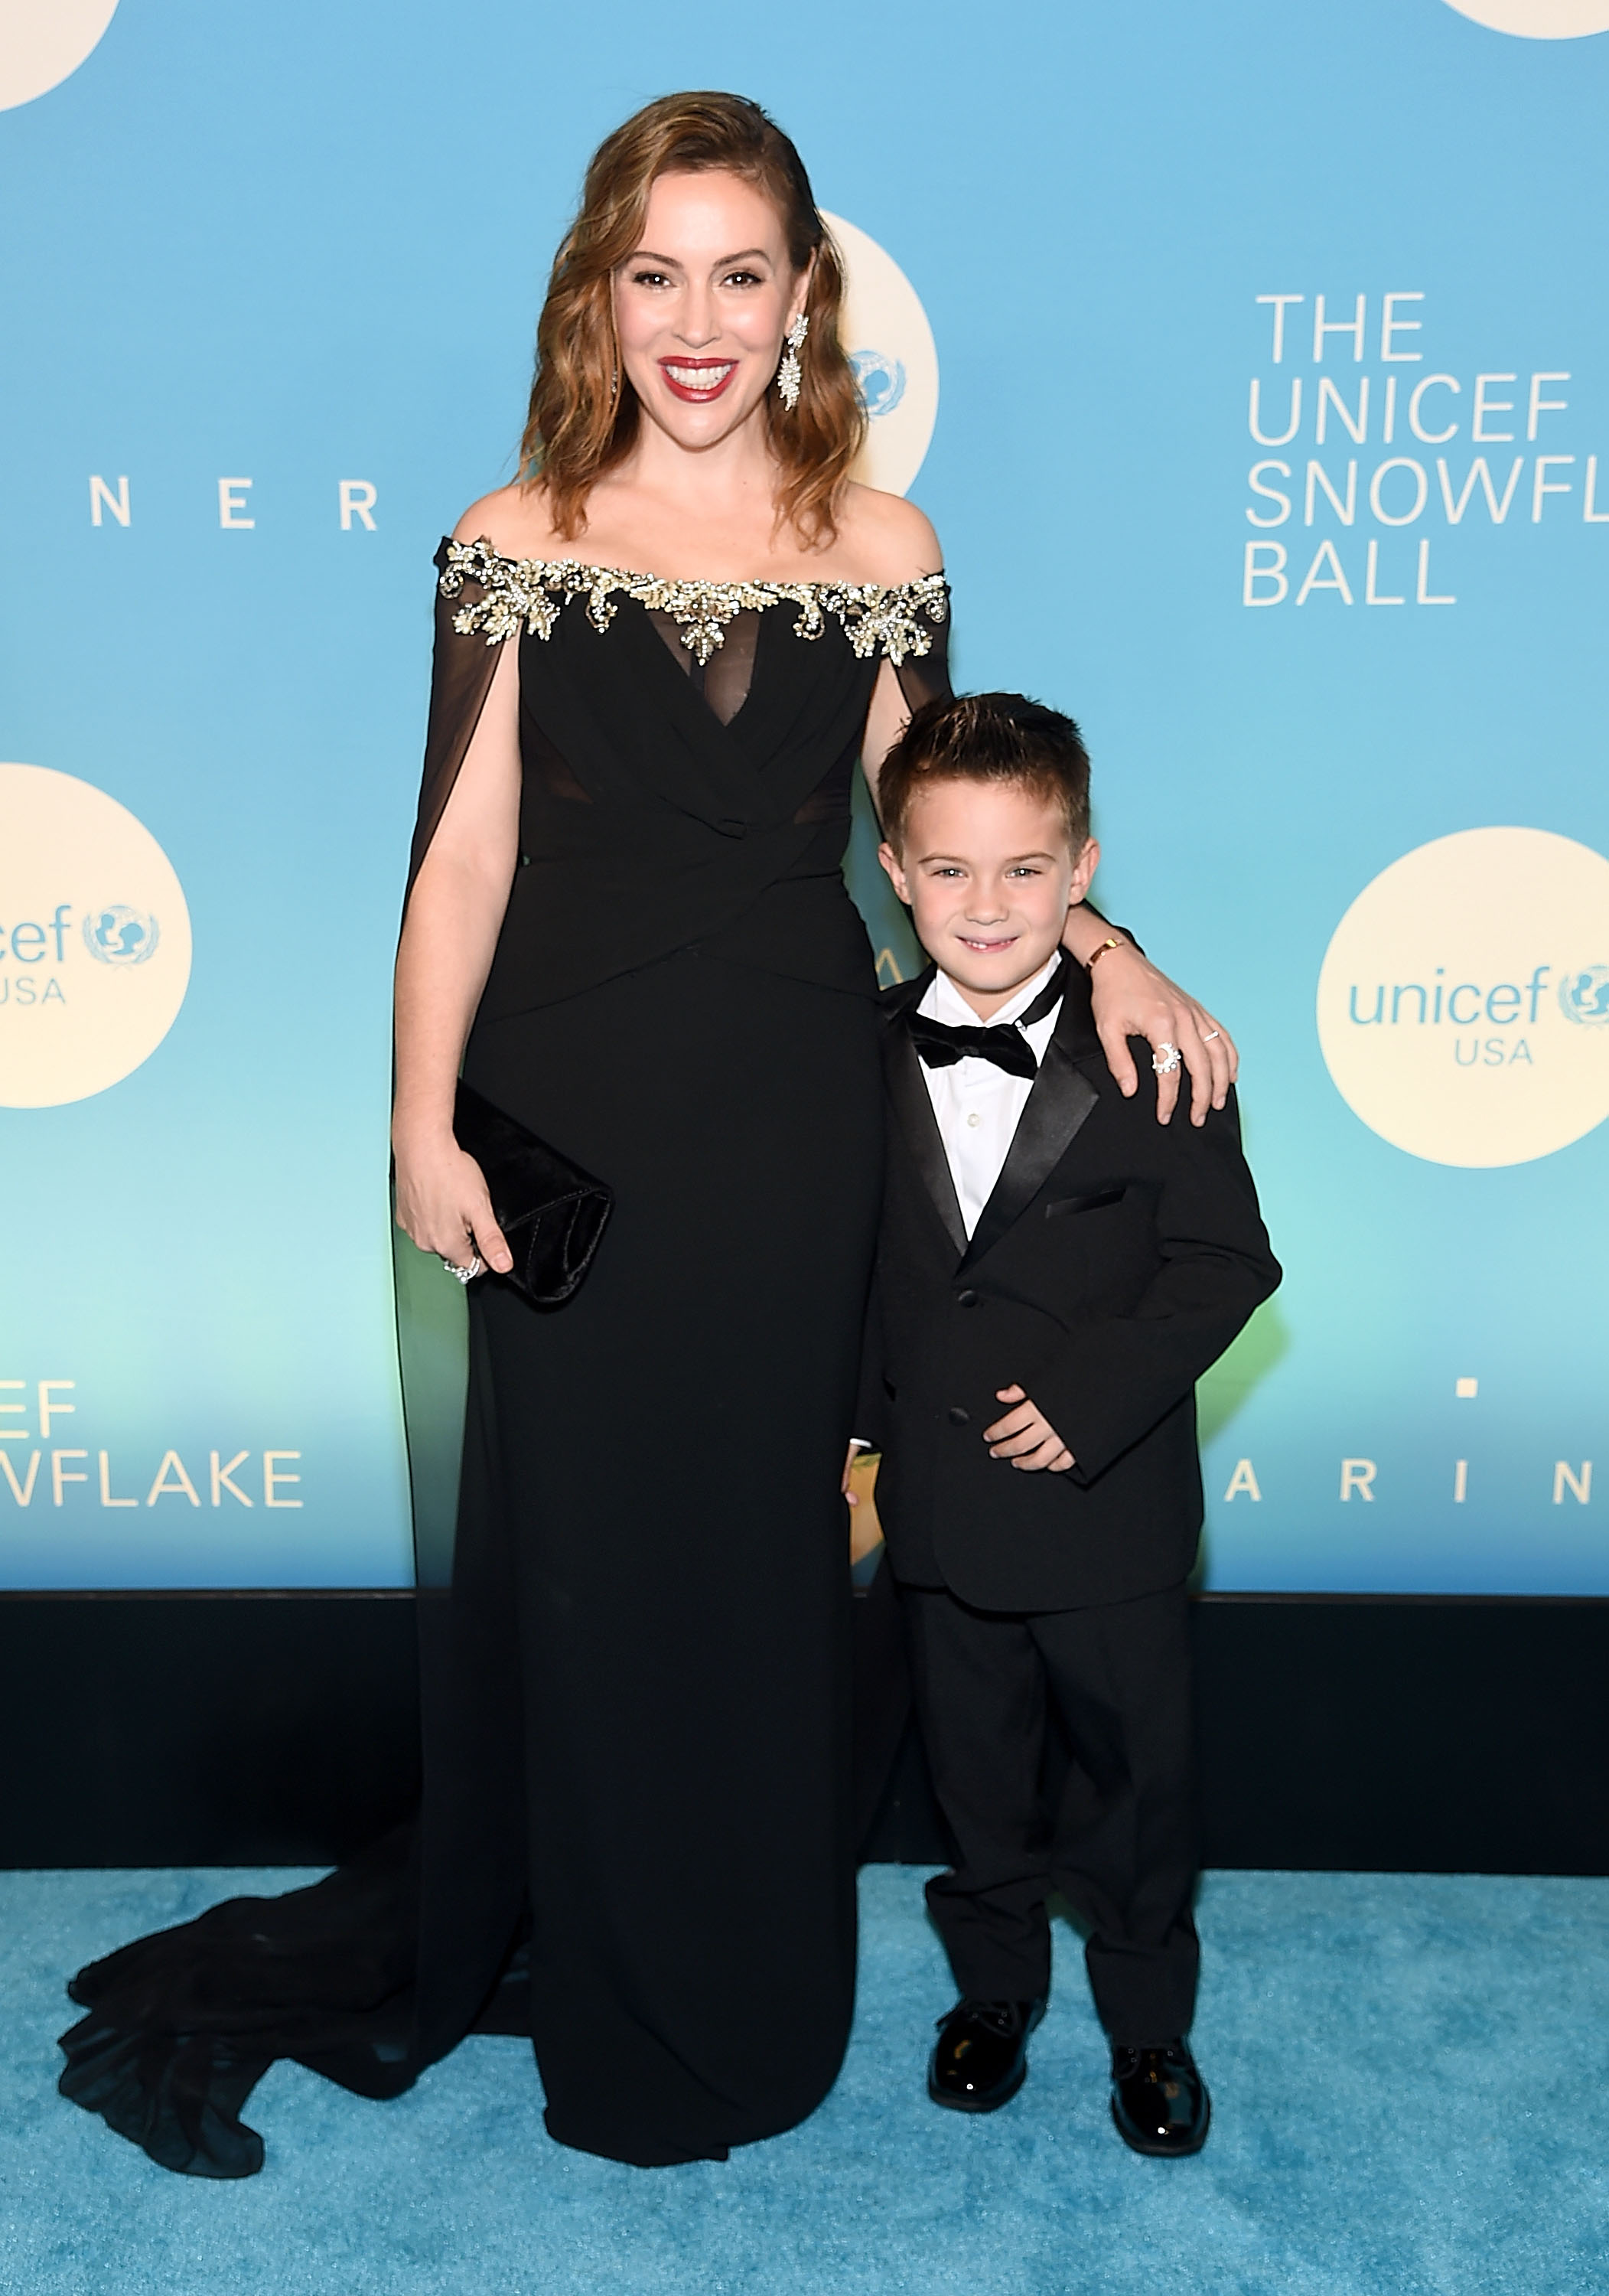 Alyssa Milano and Milo Bugliari at the 14th Annual UNICEF Snowflake Ball in New York City on November 27, 2018 | Source: Getty Images